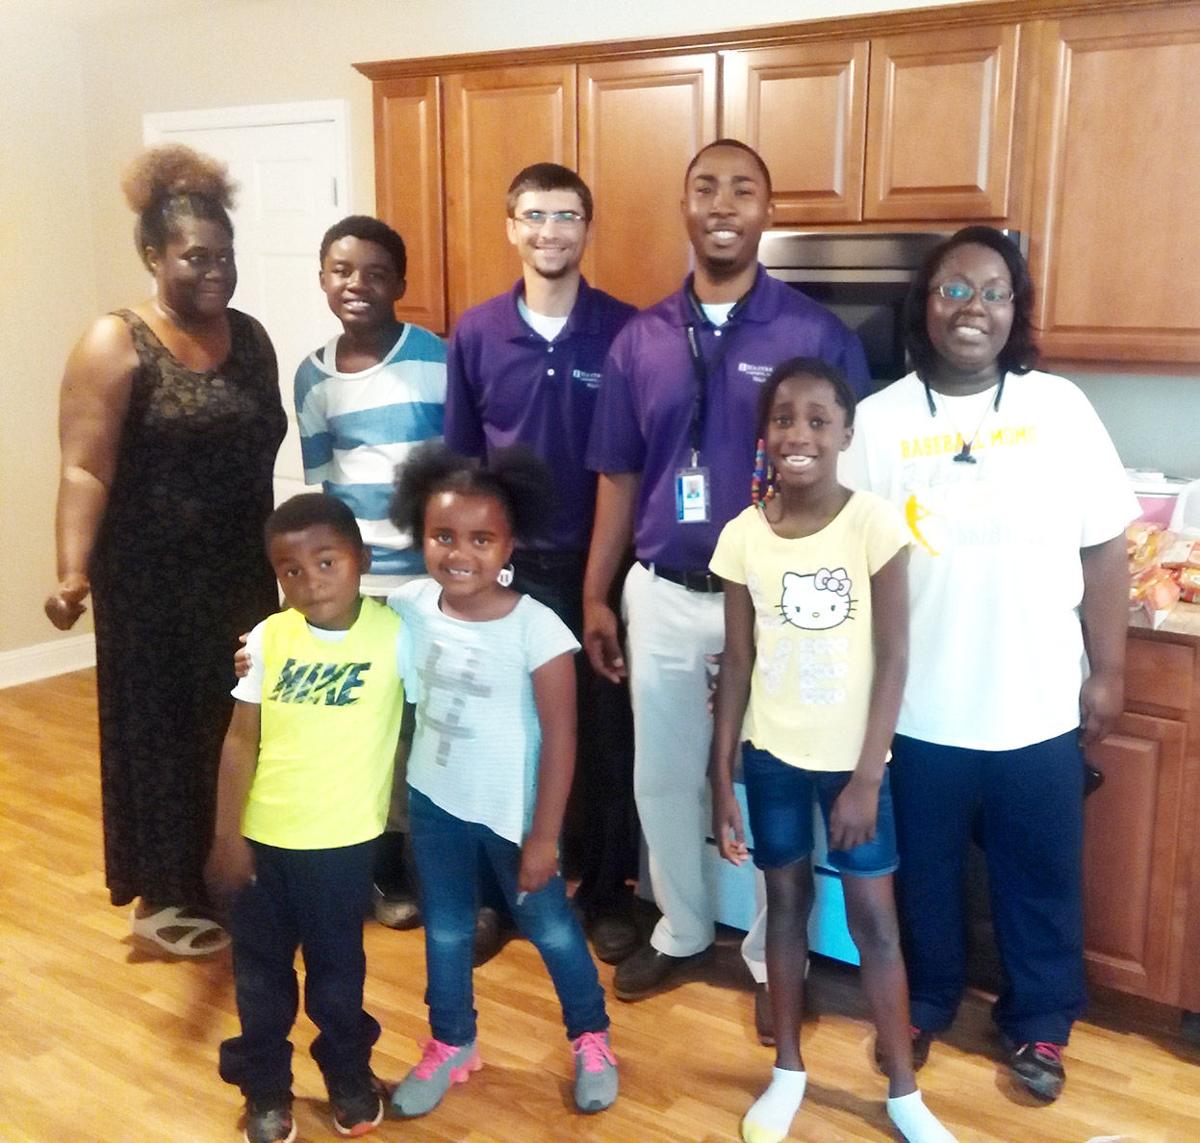 Family Moves In As Talladega County Habitat For Humanity Completes